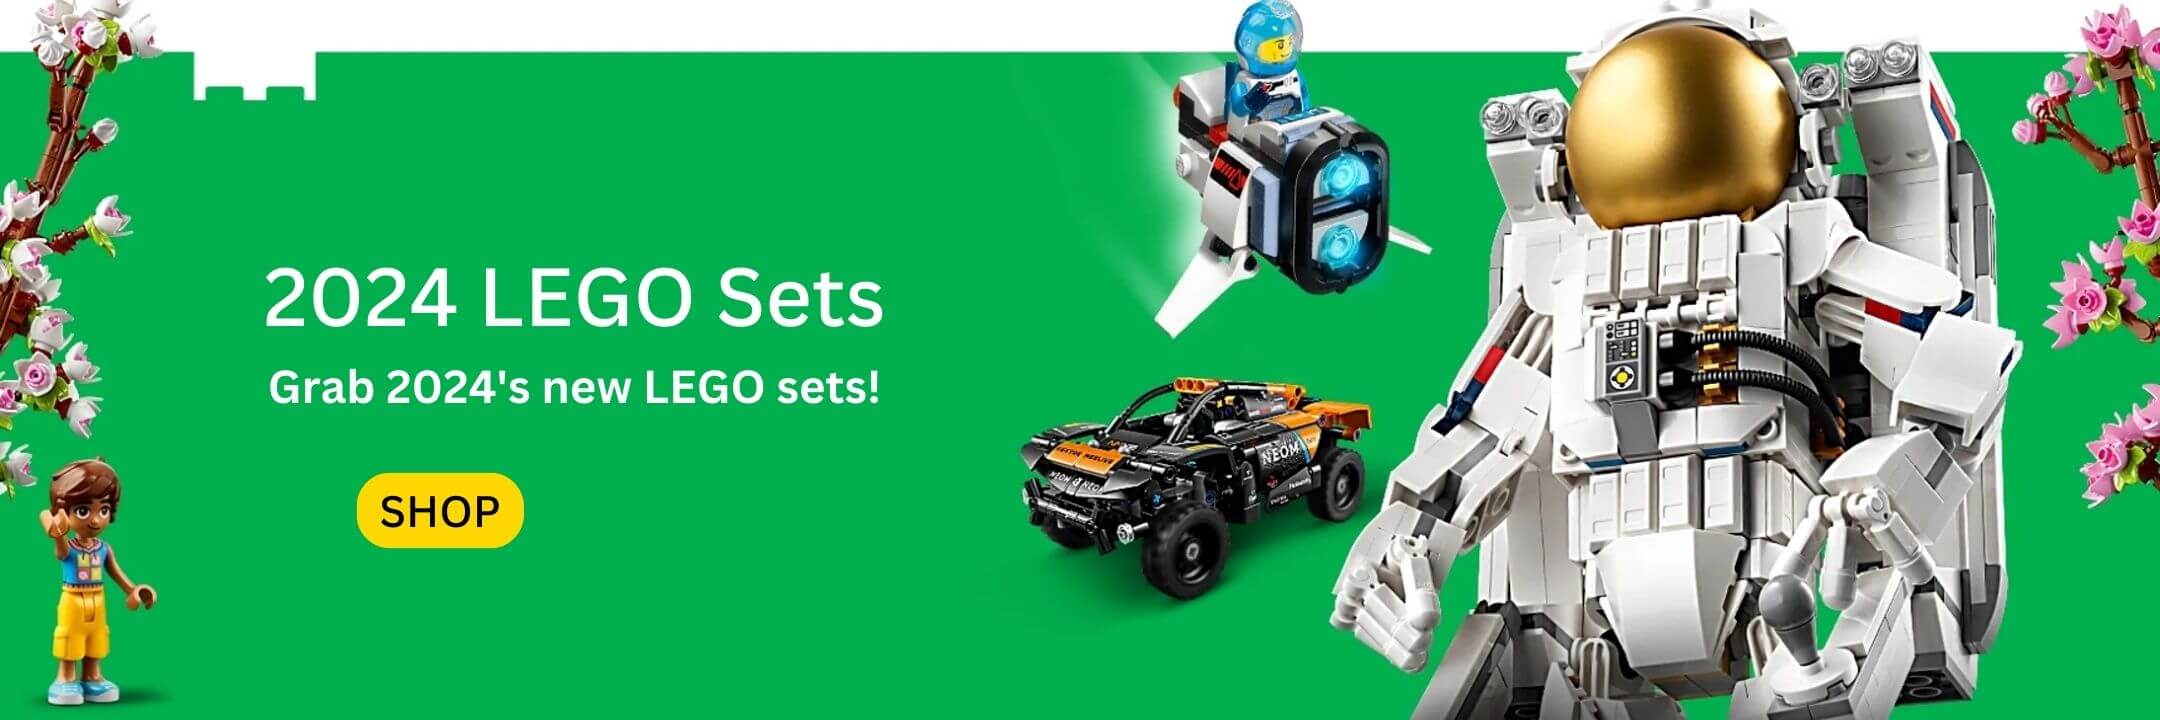 2024 LEGO Sets - Grab 2024's new LEGO sets today